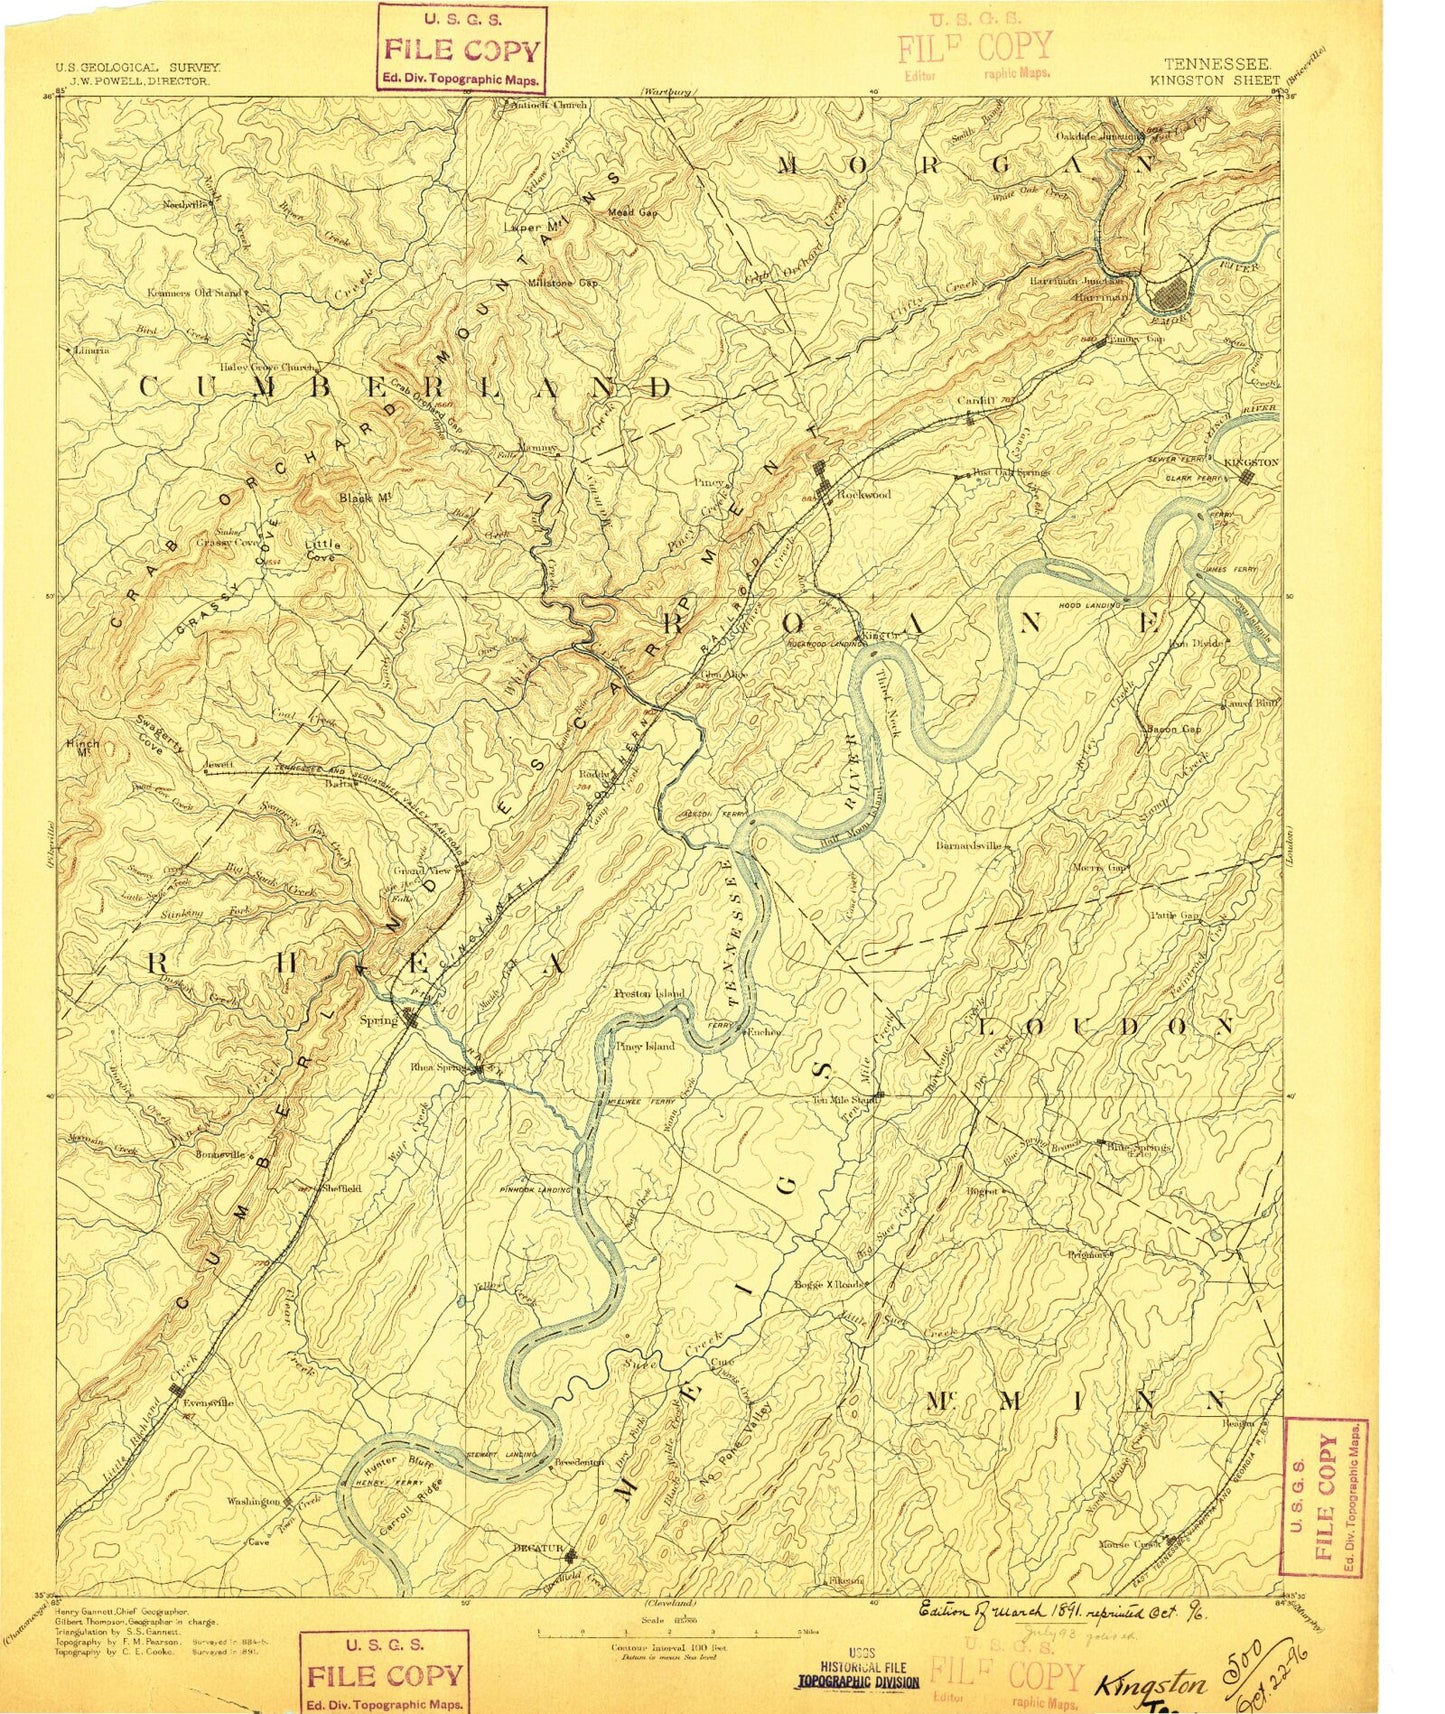 Historic 1891 Kingston Tennessee 30'x30' Topo Map Image